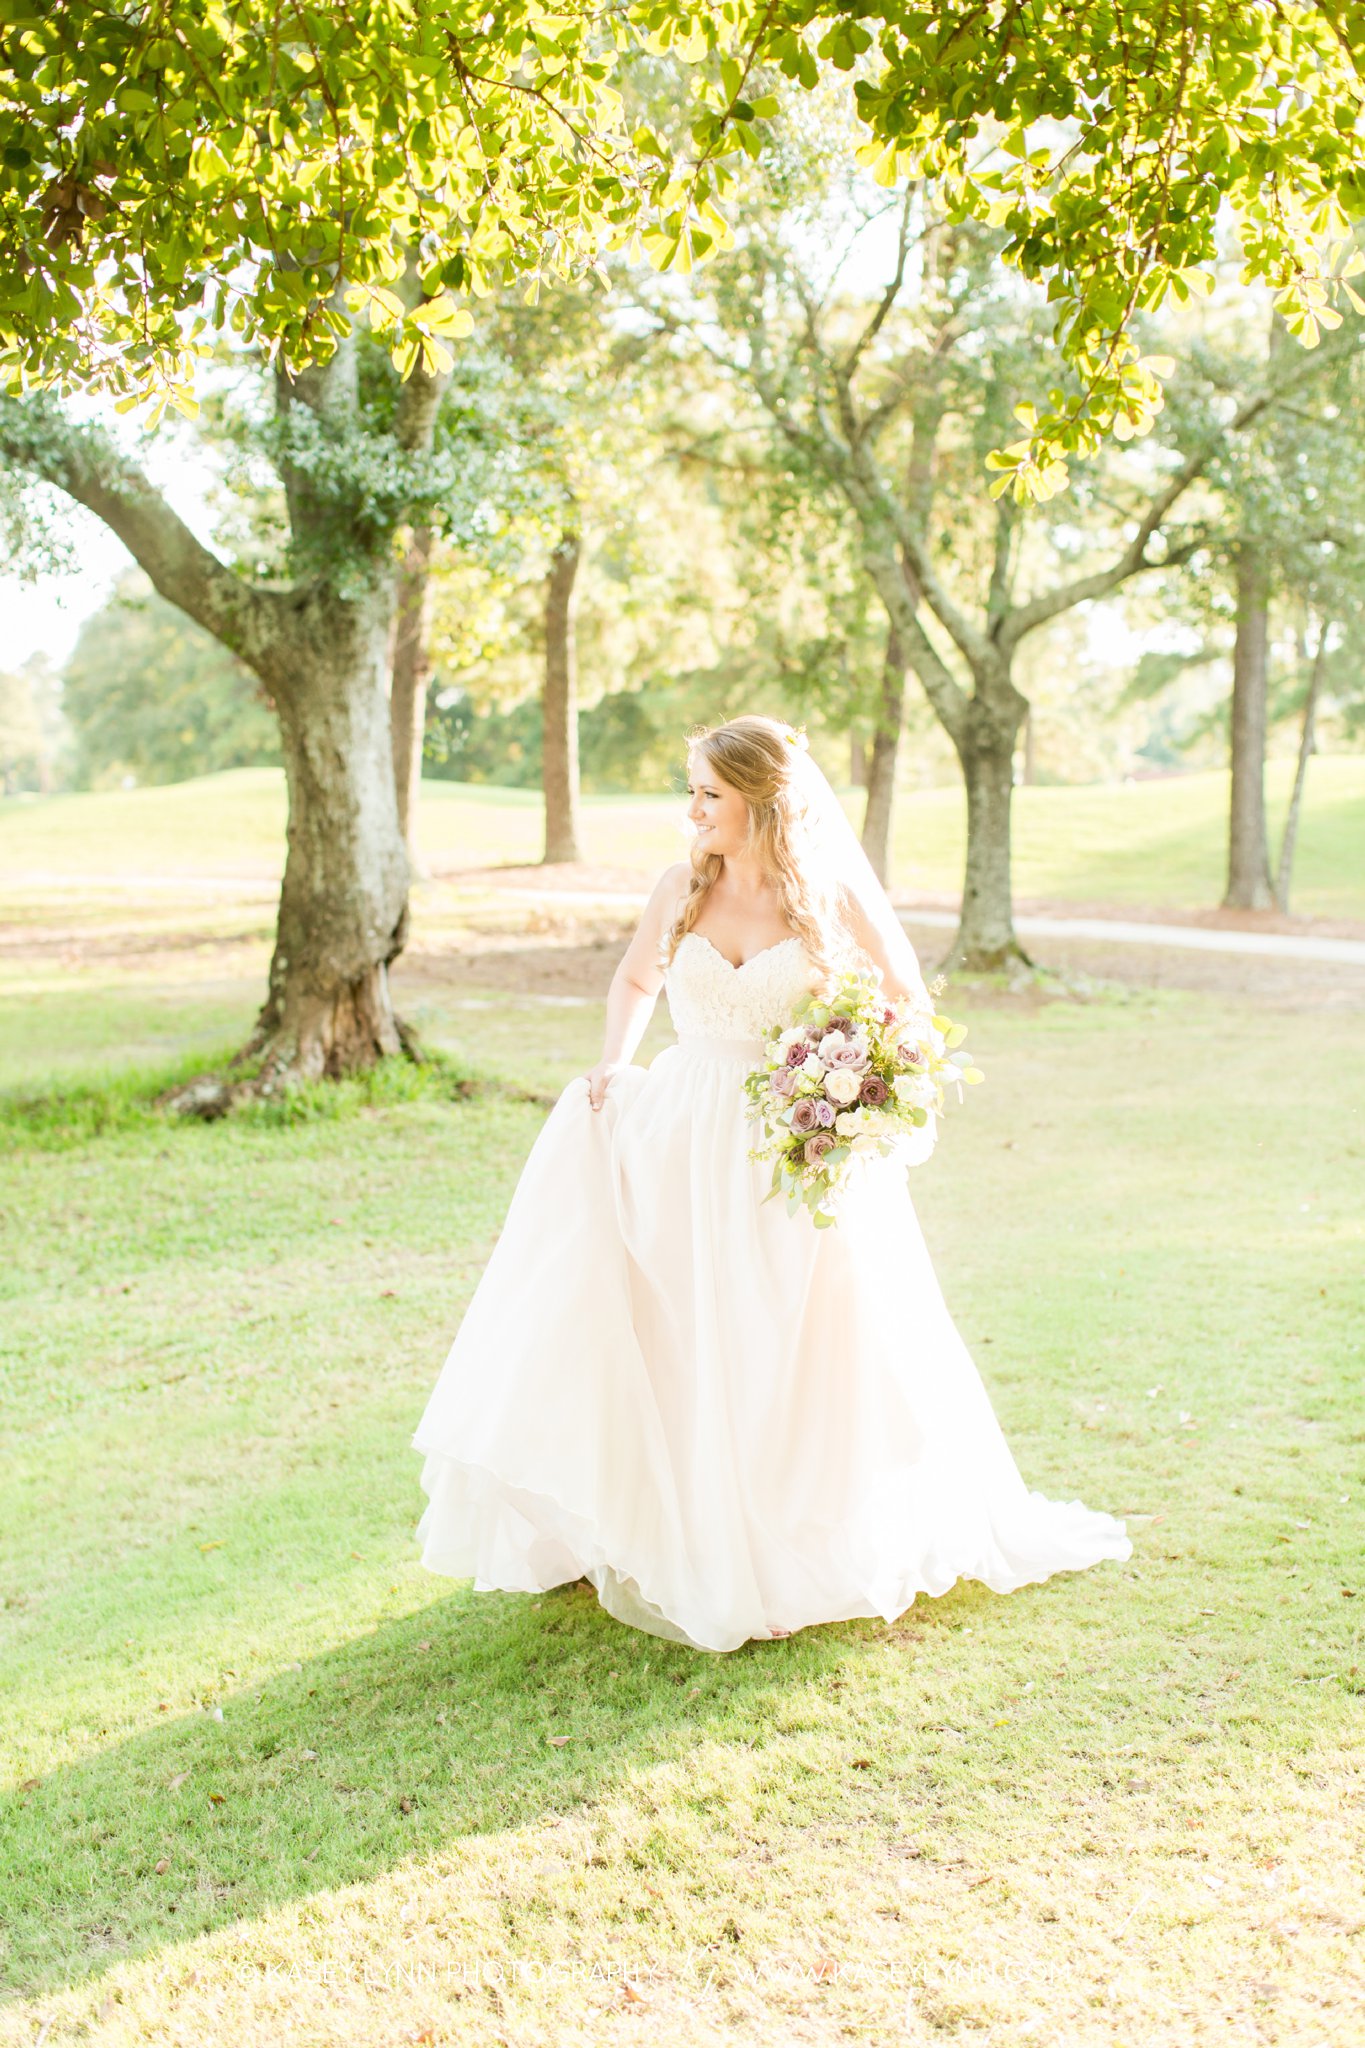 The Woodlands Country Club Bridals / Kasey Lynn Photography